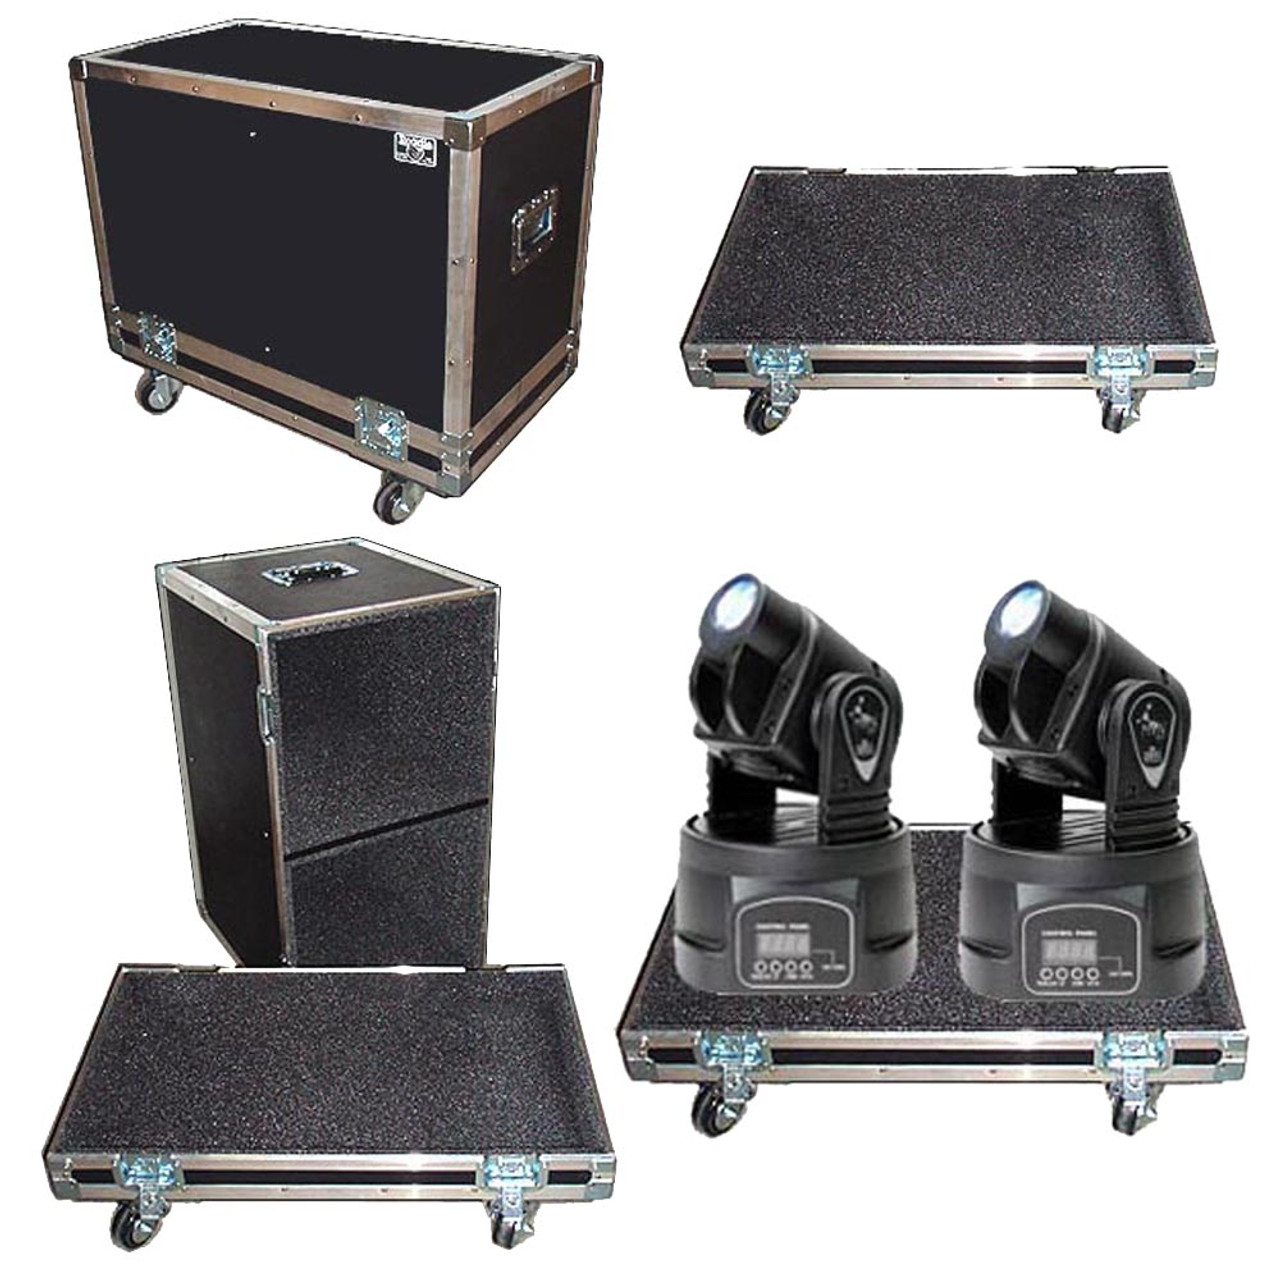 Moving Head Single ATA 1/4 Cases by Brand & Model